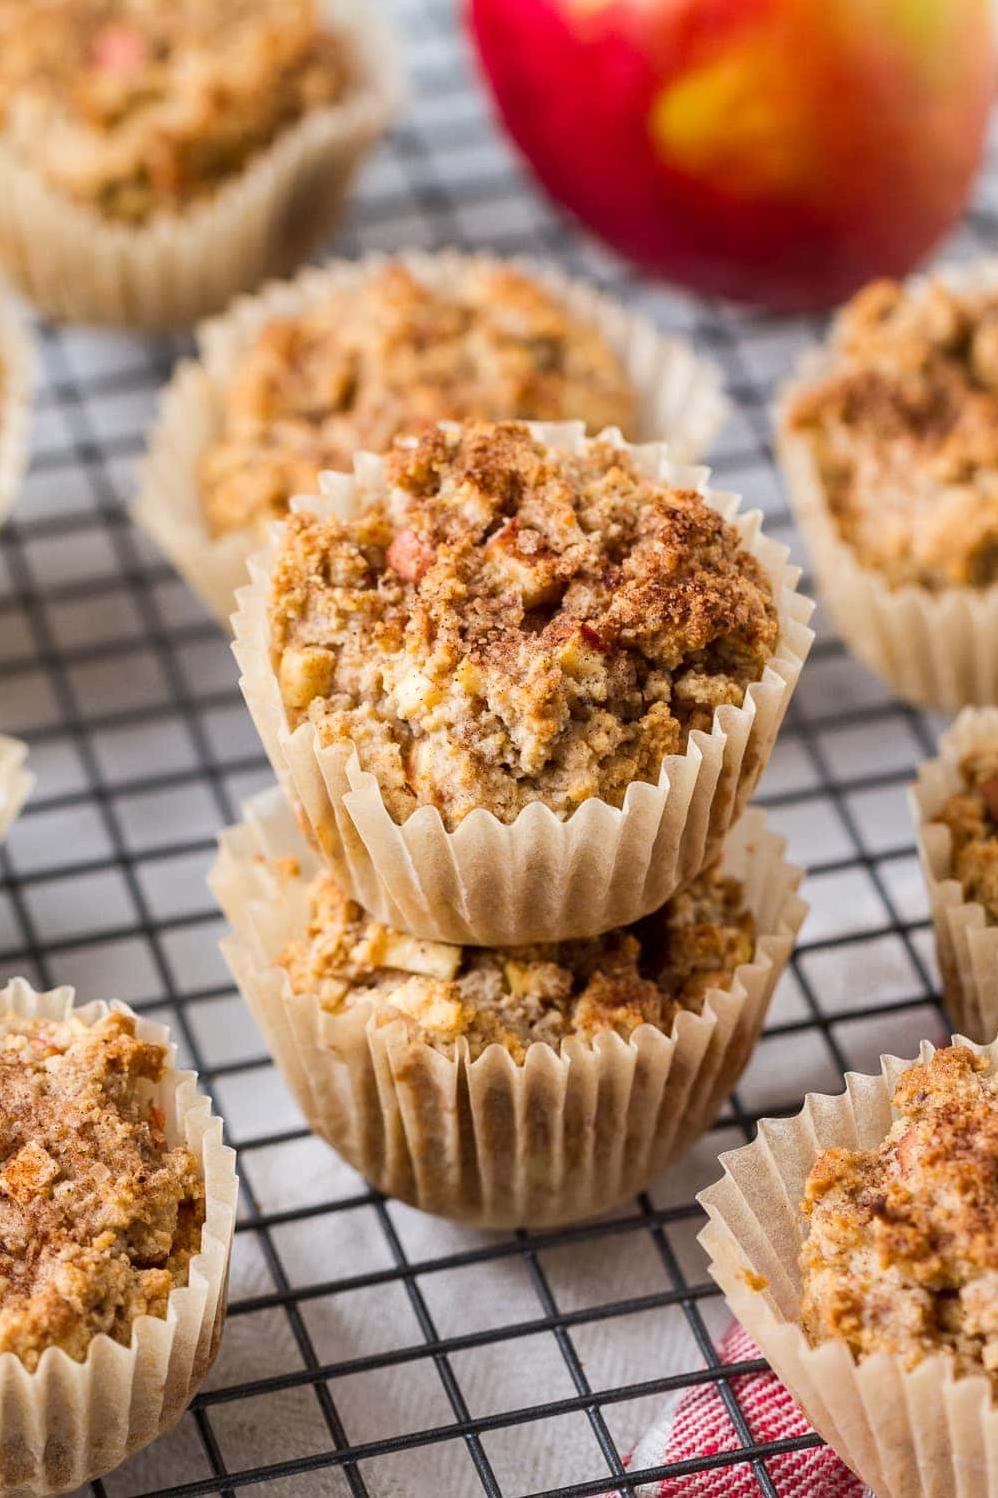  Dive into the soft, tender texture of these gluten-free muffins